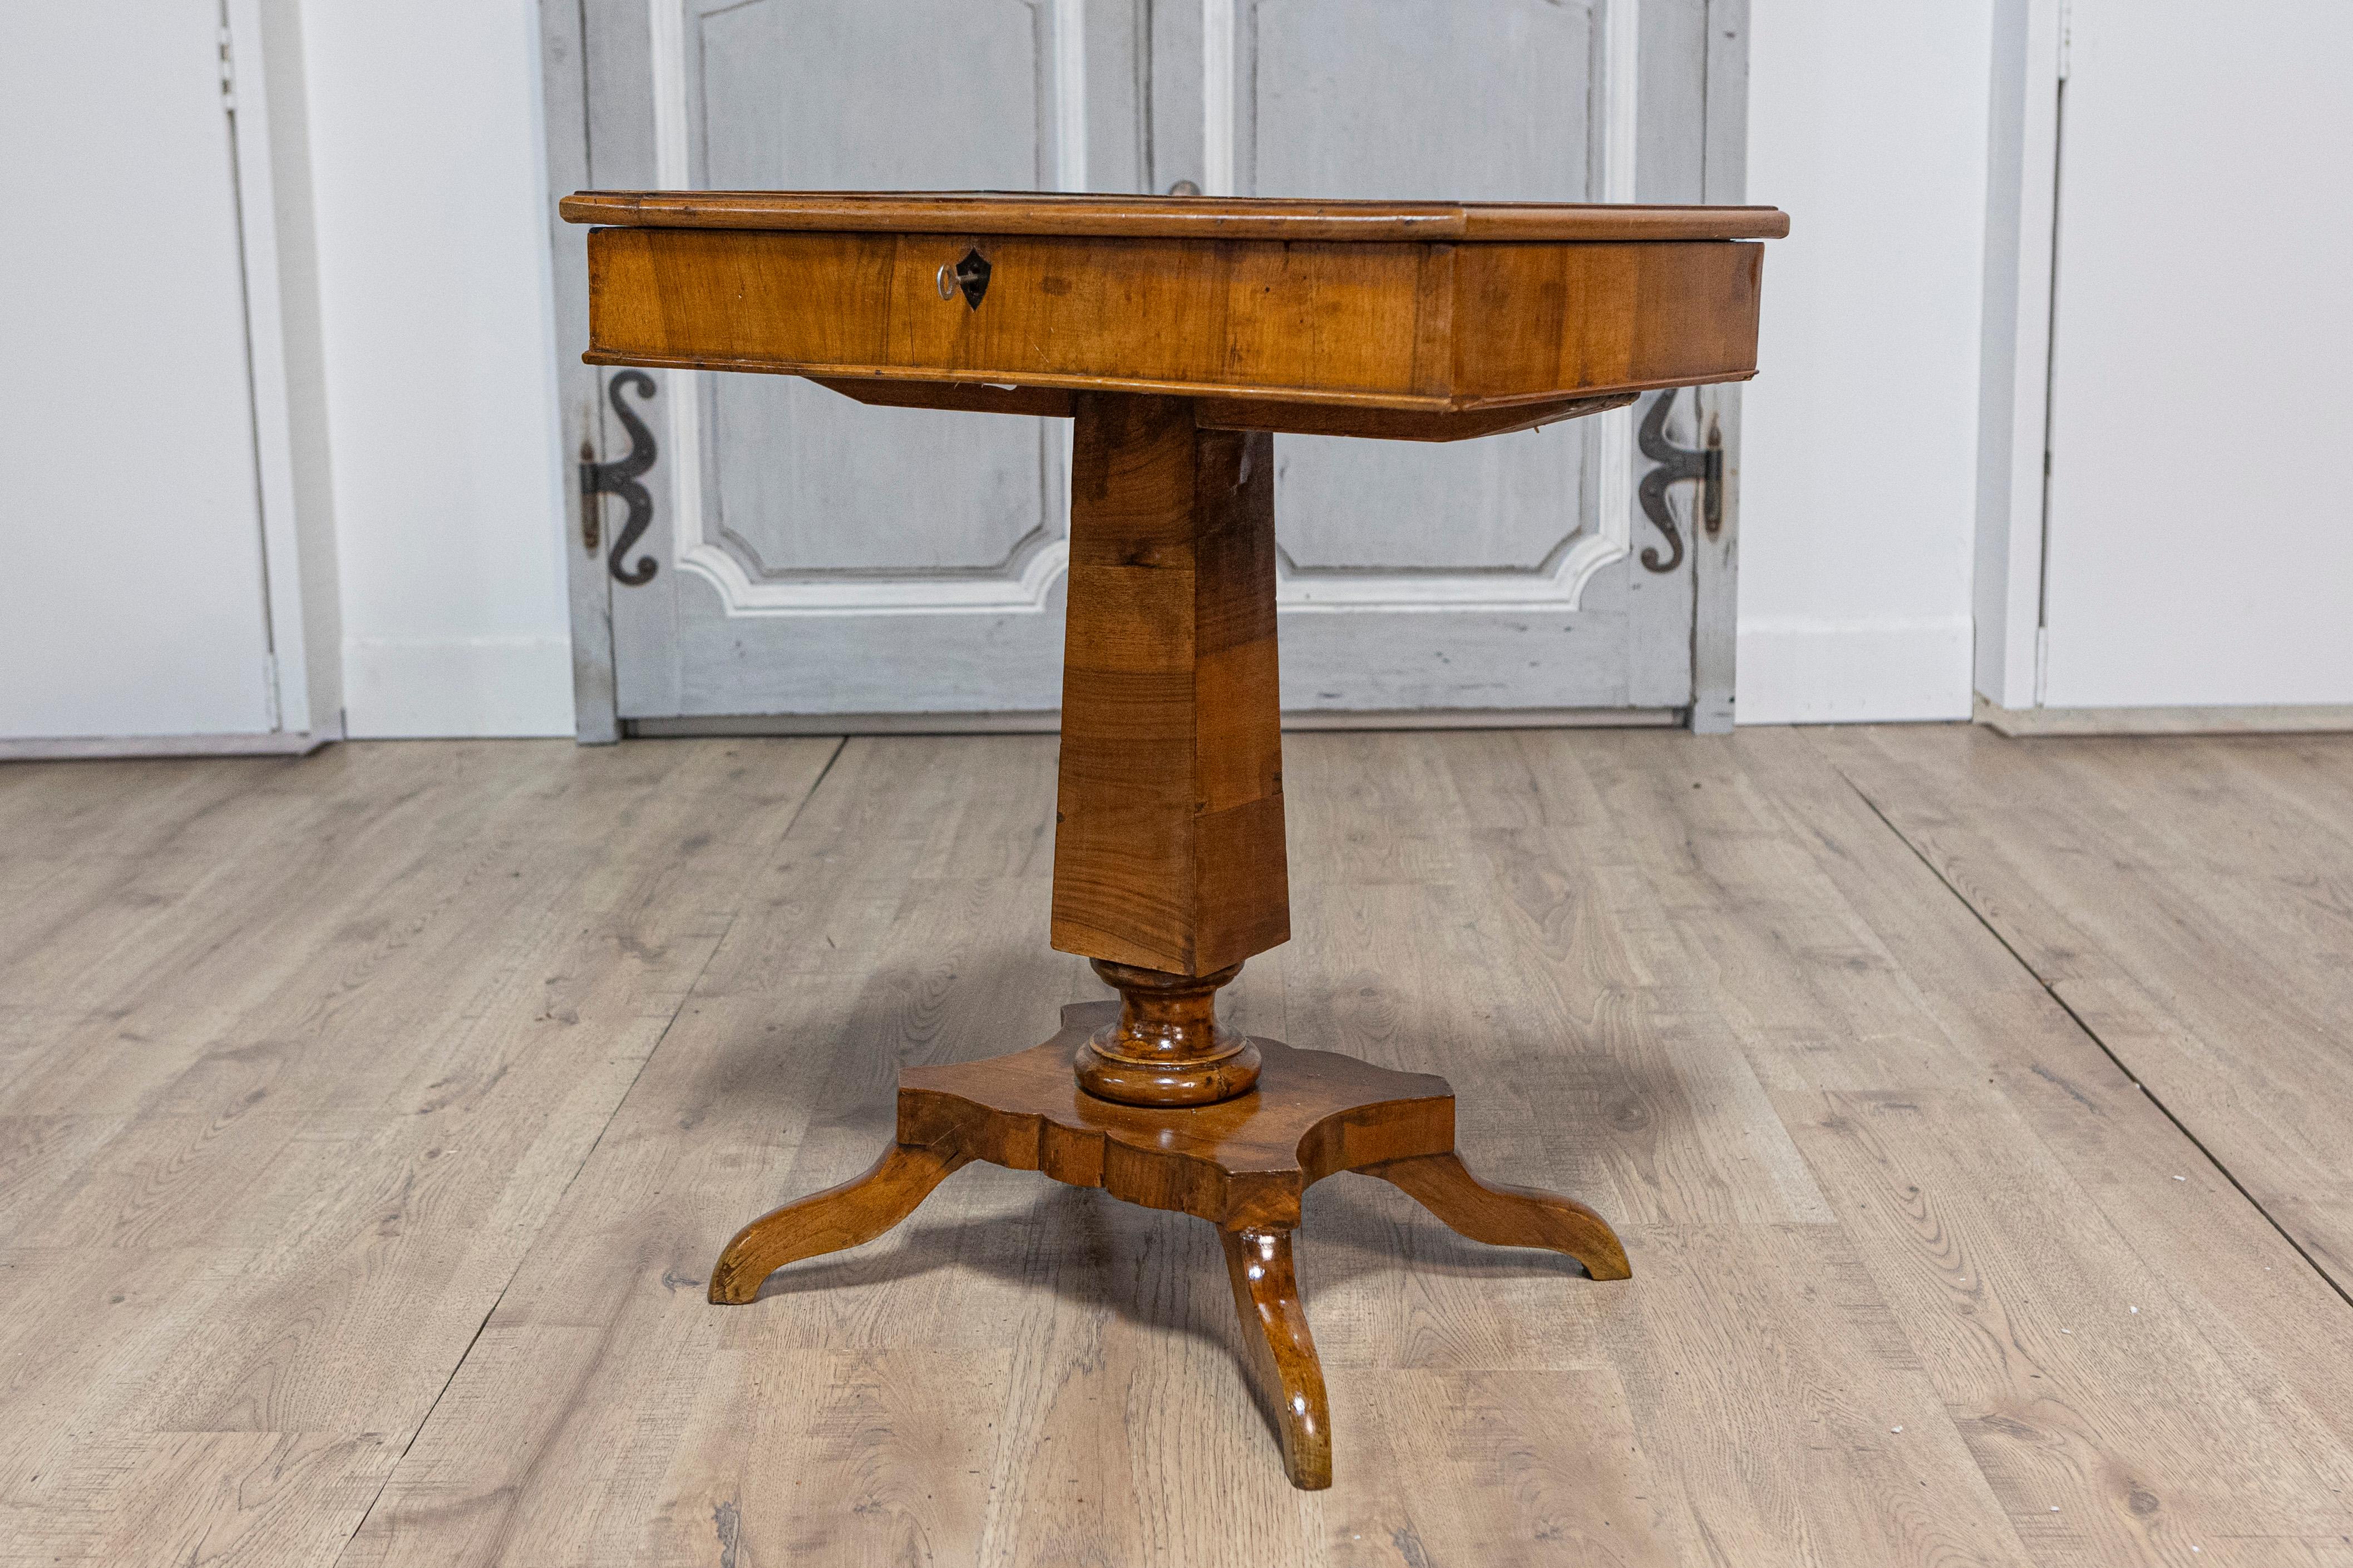 Italian 19th Century Walnut Pedestal Table with Quadripod Base and Single Drawer In Good Condition For Sale In Atlanta, GA